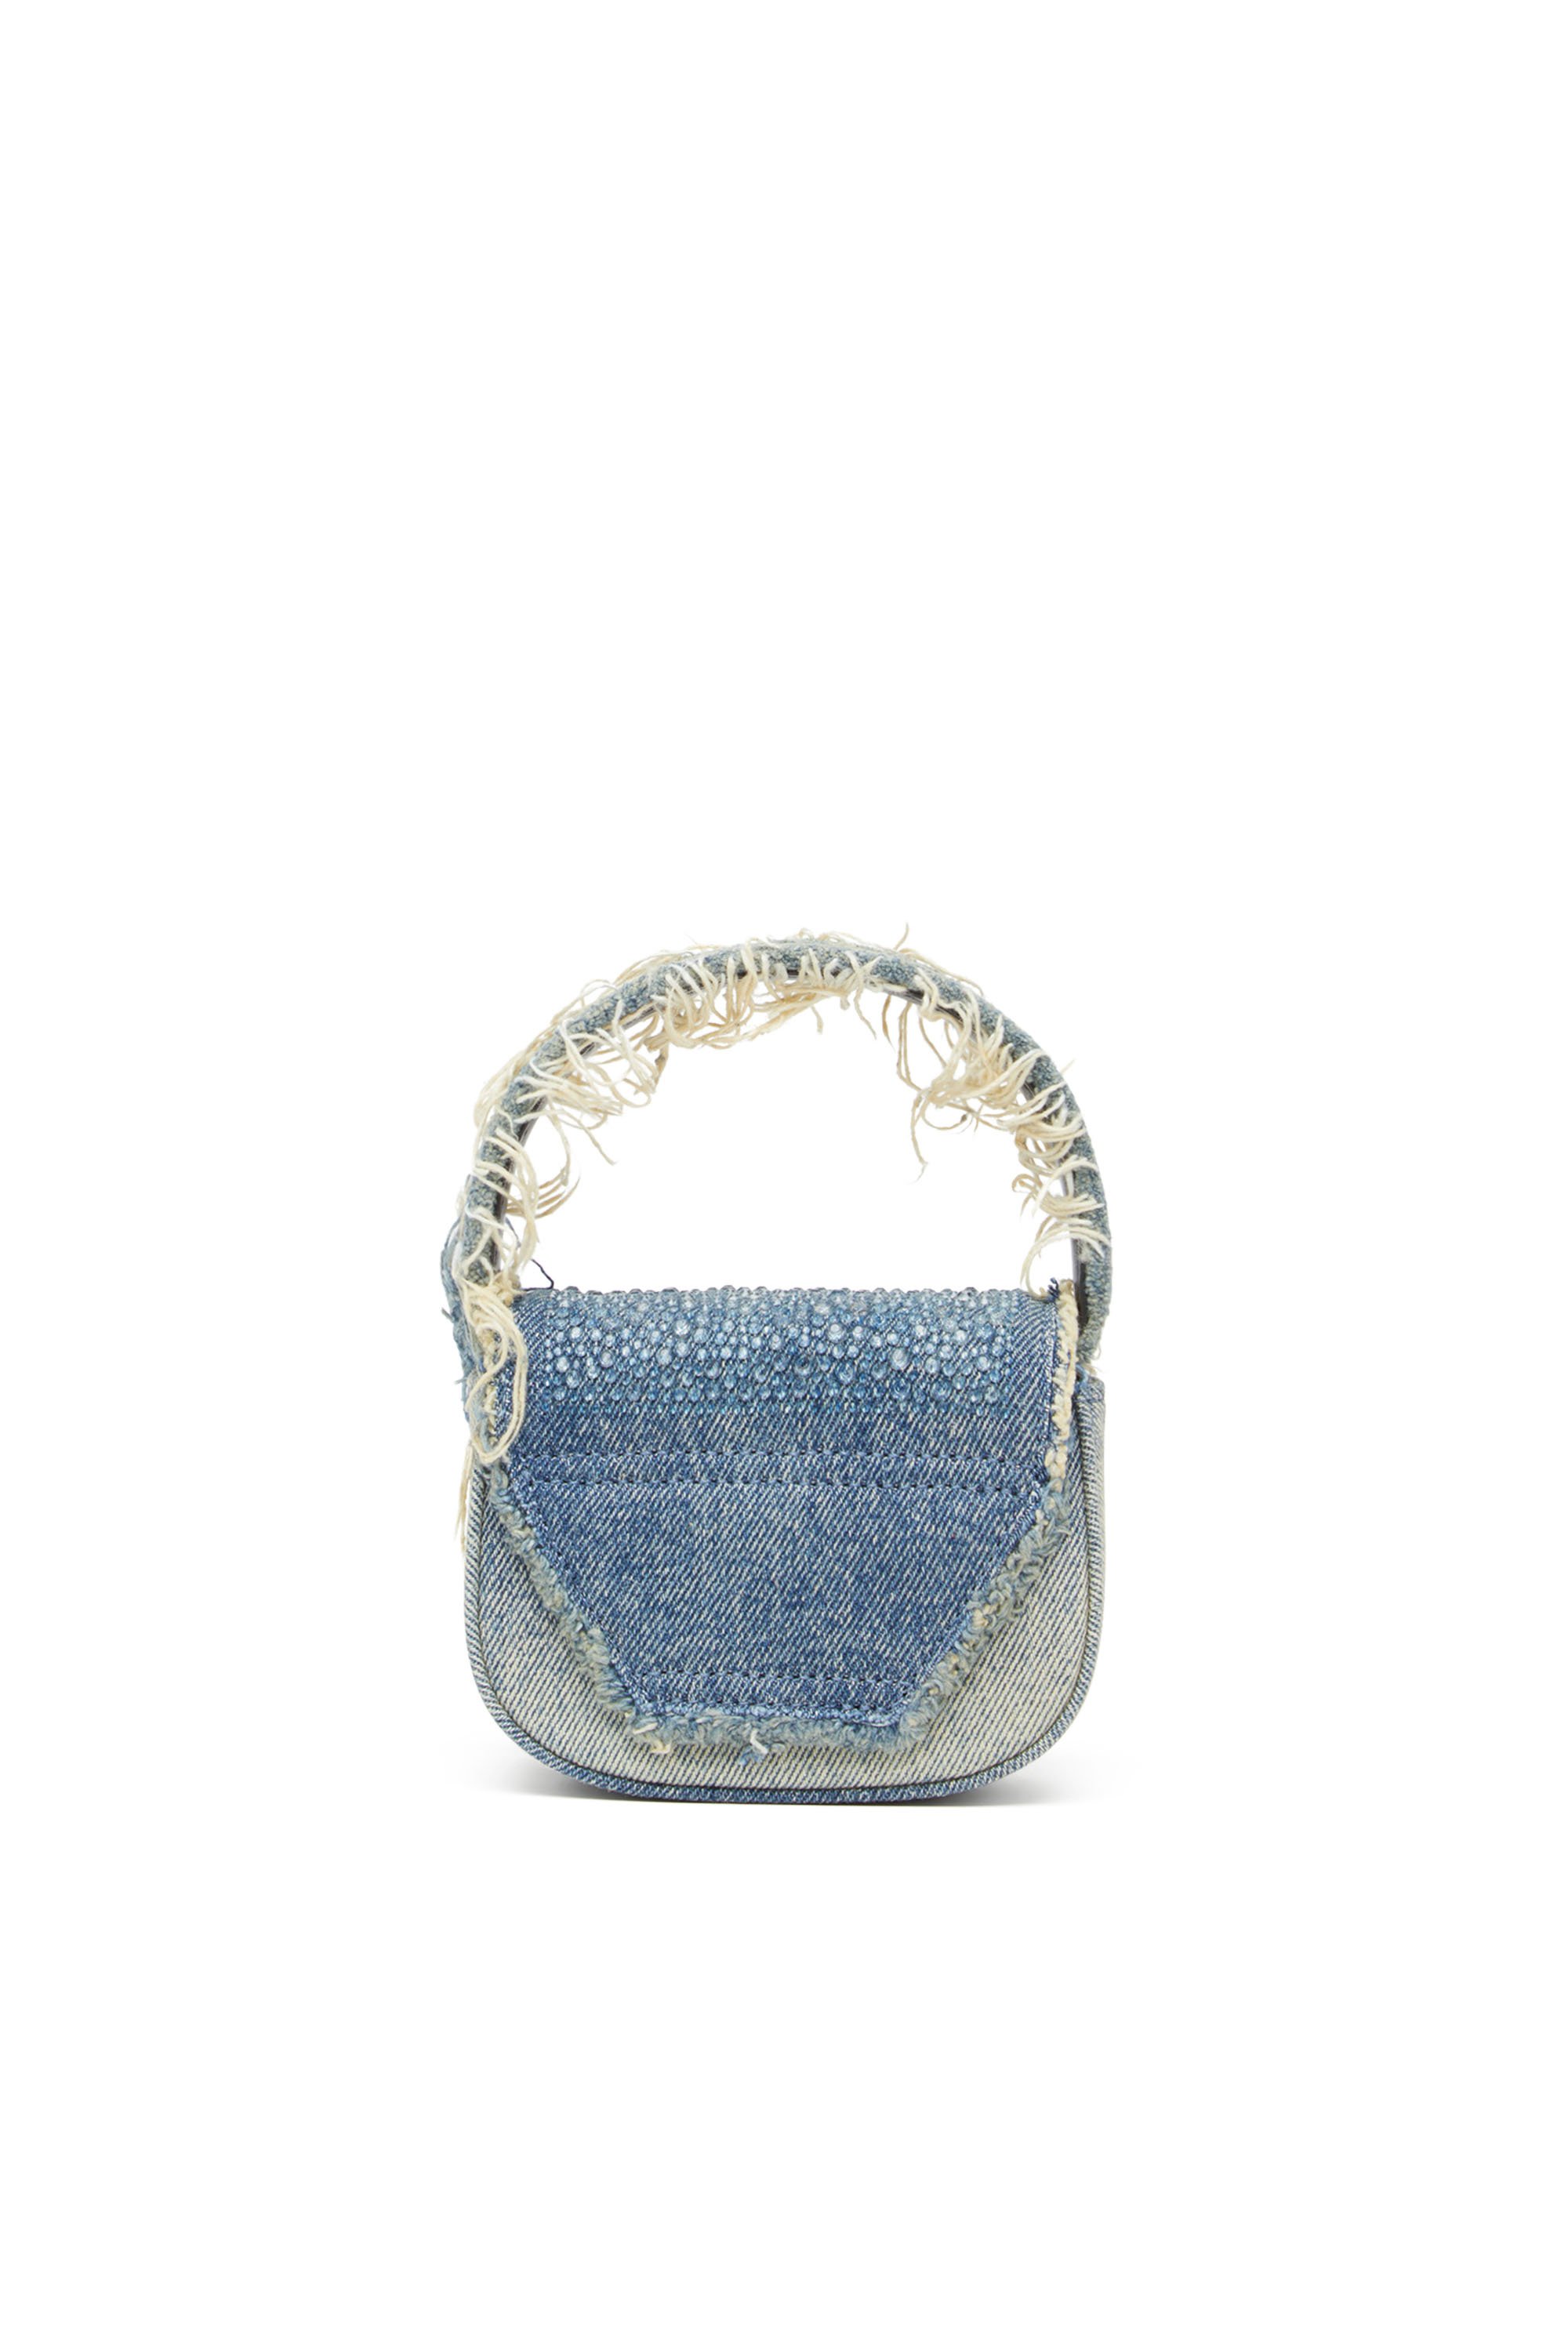 Diesel - 1DR XS, Woman 1DR XS-Iconic mini bag in denim and crystals in Blue - Image 2